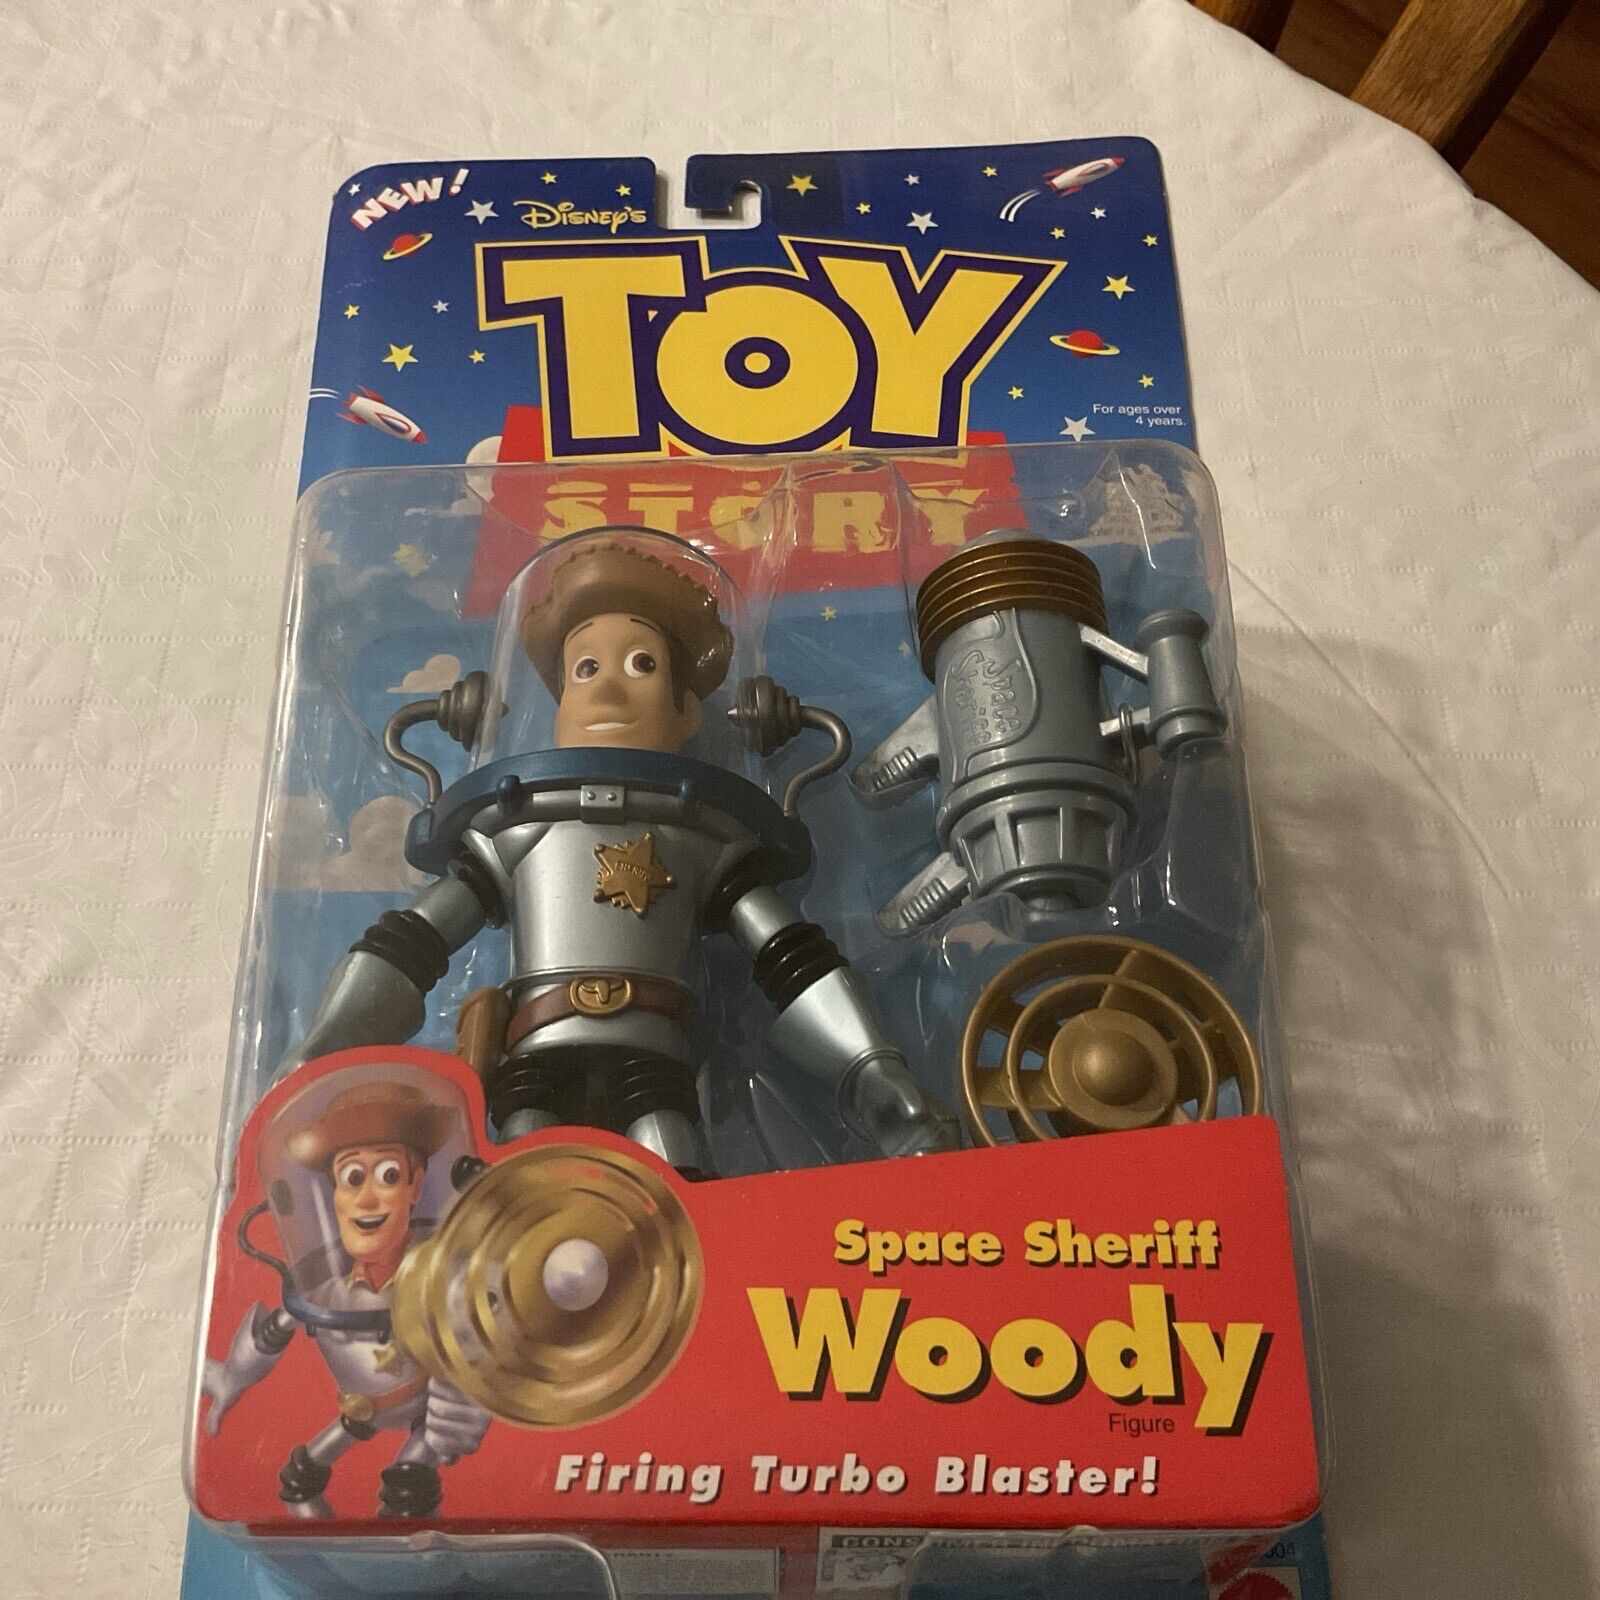 Disney Pixar Toy Story 19004 Space Sheriff Woody New In Box - Rare Vintage